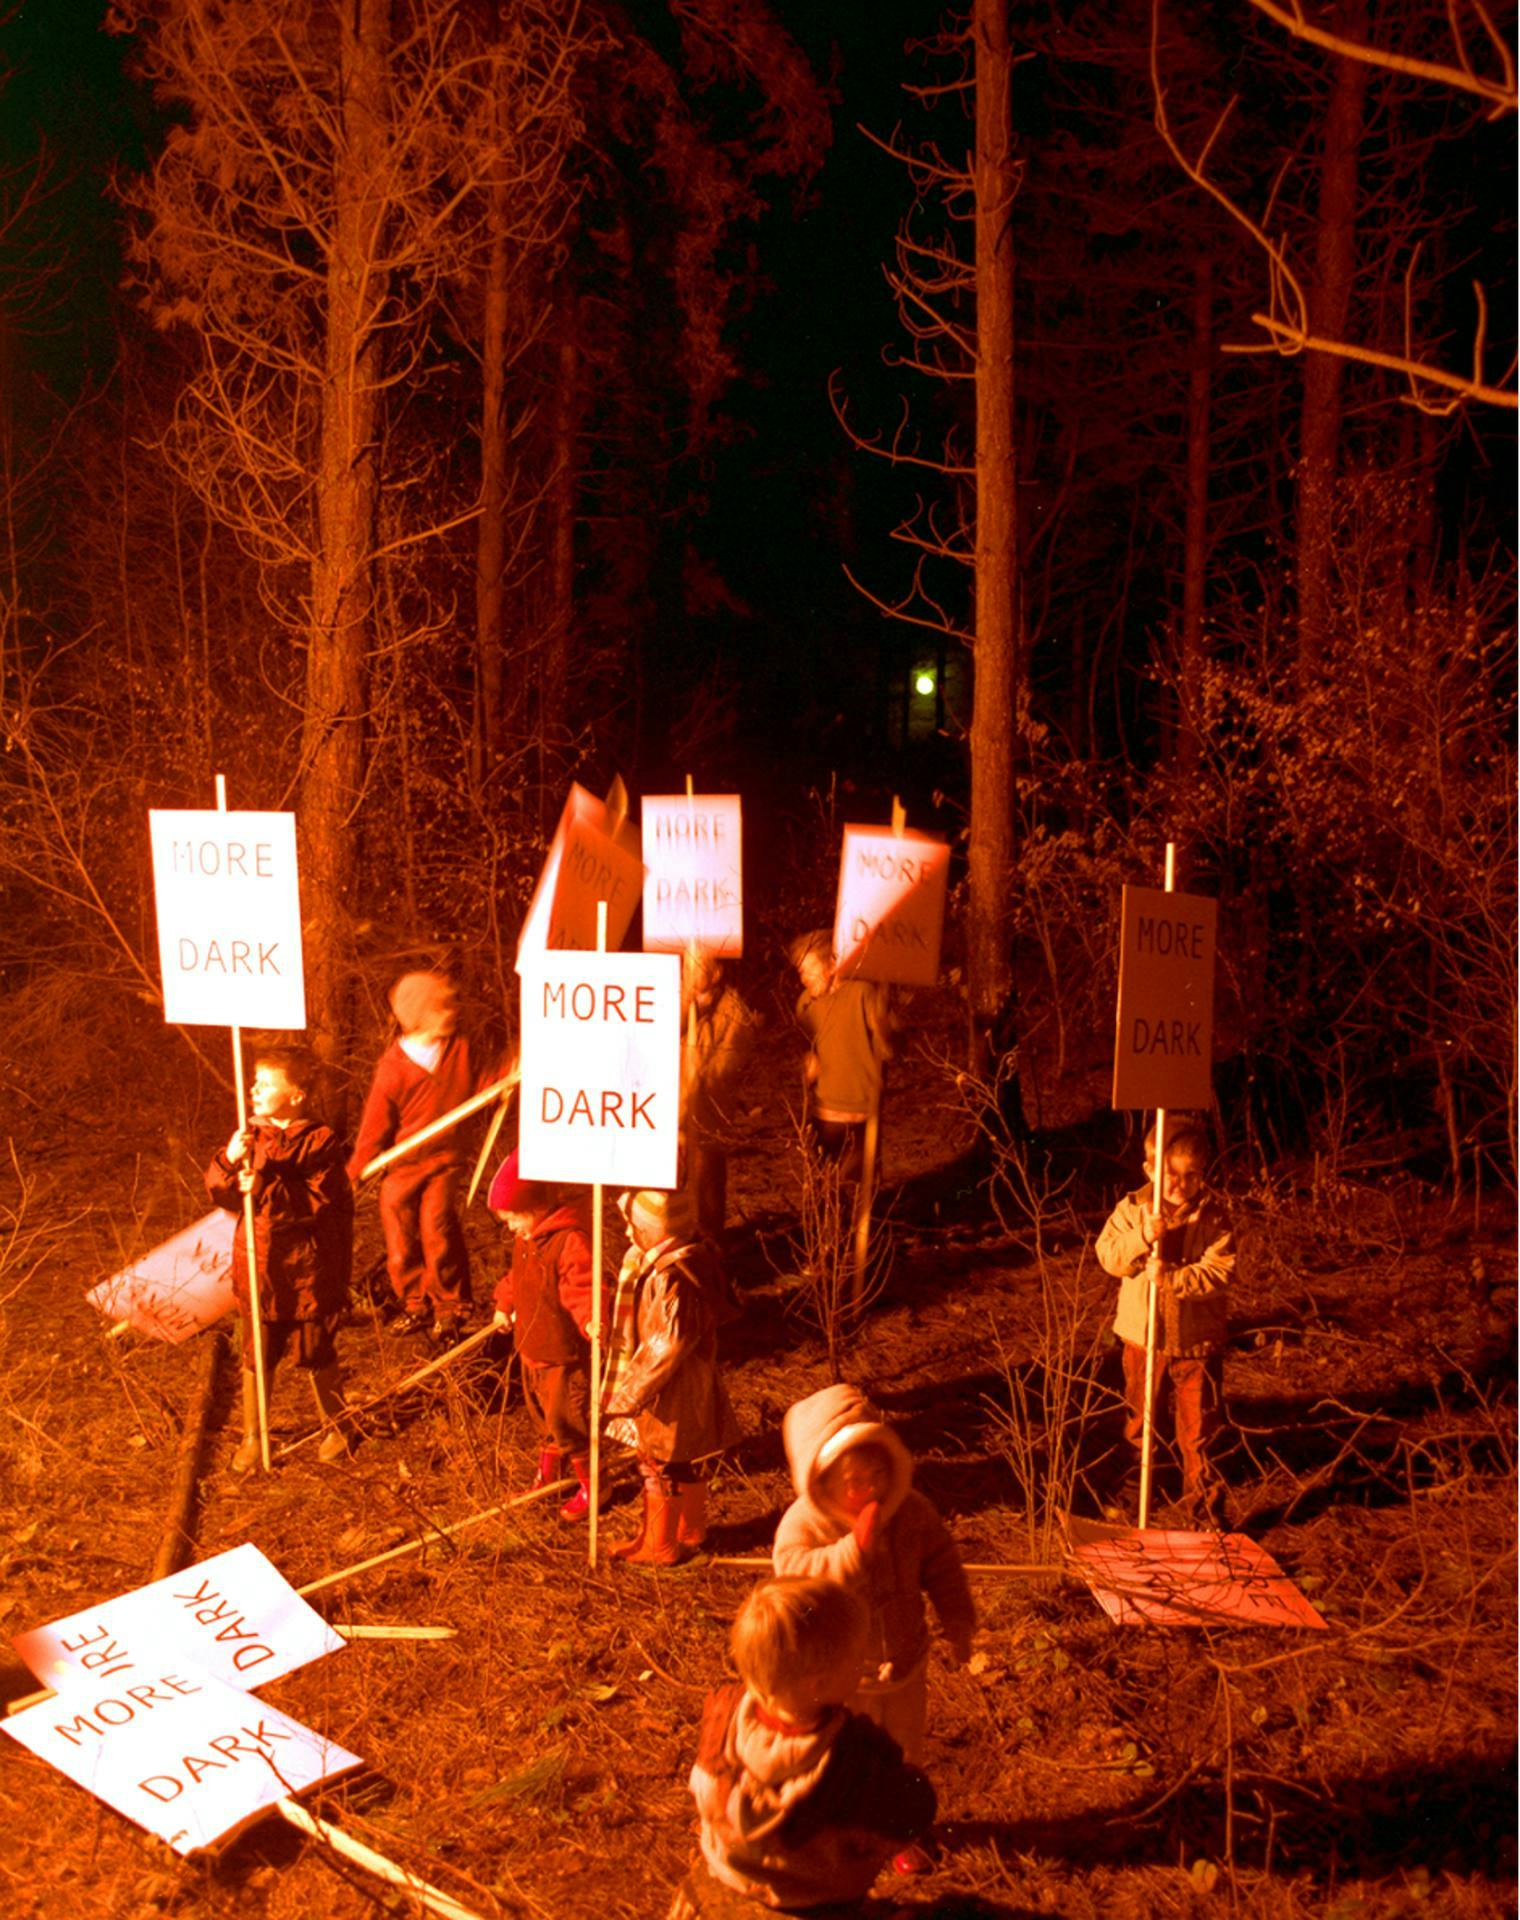 Image of a group of children standing in a clearing in a forest holding protest signs which read 'More dark'.